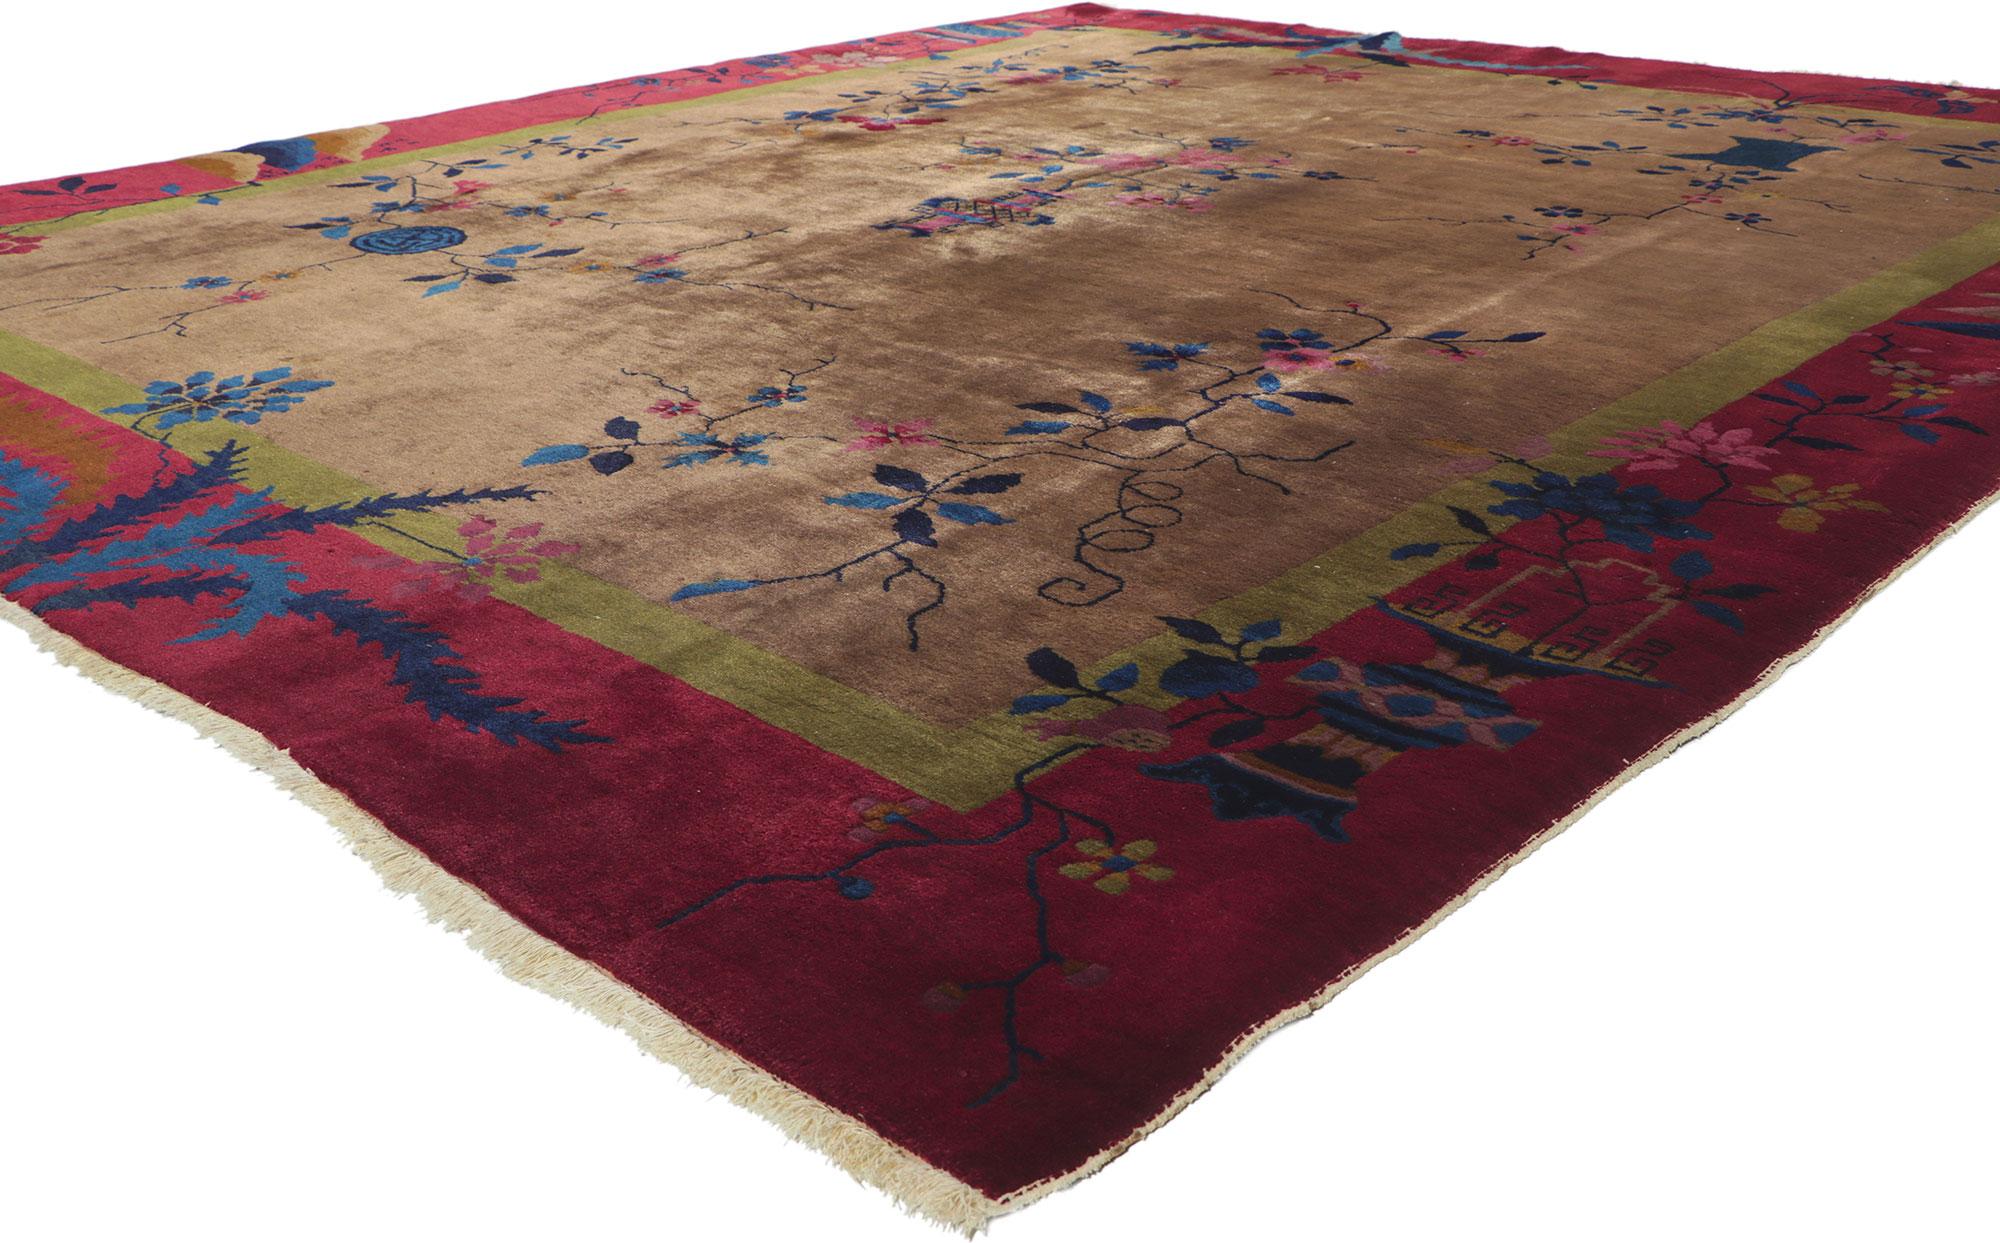 78303 Antique Chinese Art Deco Rug, 08'02 x 09'05. This hand knotted wool antique Chinese Art Deco rug features a color-blocked field and border scheme festooned with large, glorious sprays of flowers. Lotuses, peonies, chrysanthemums, and plum